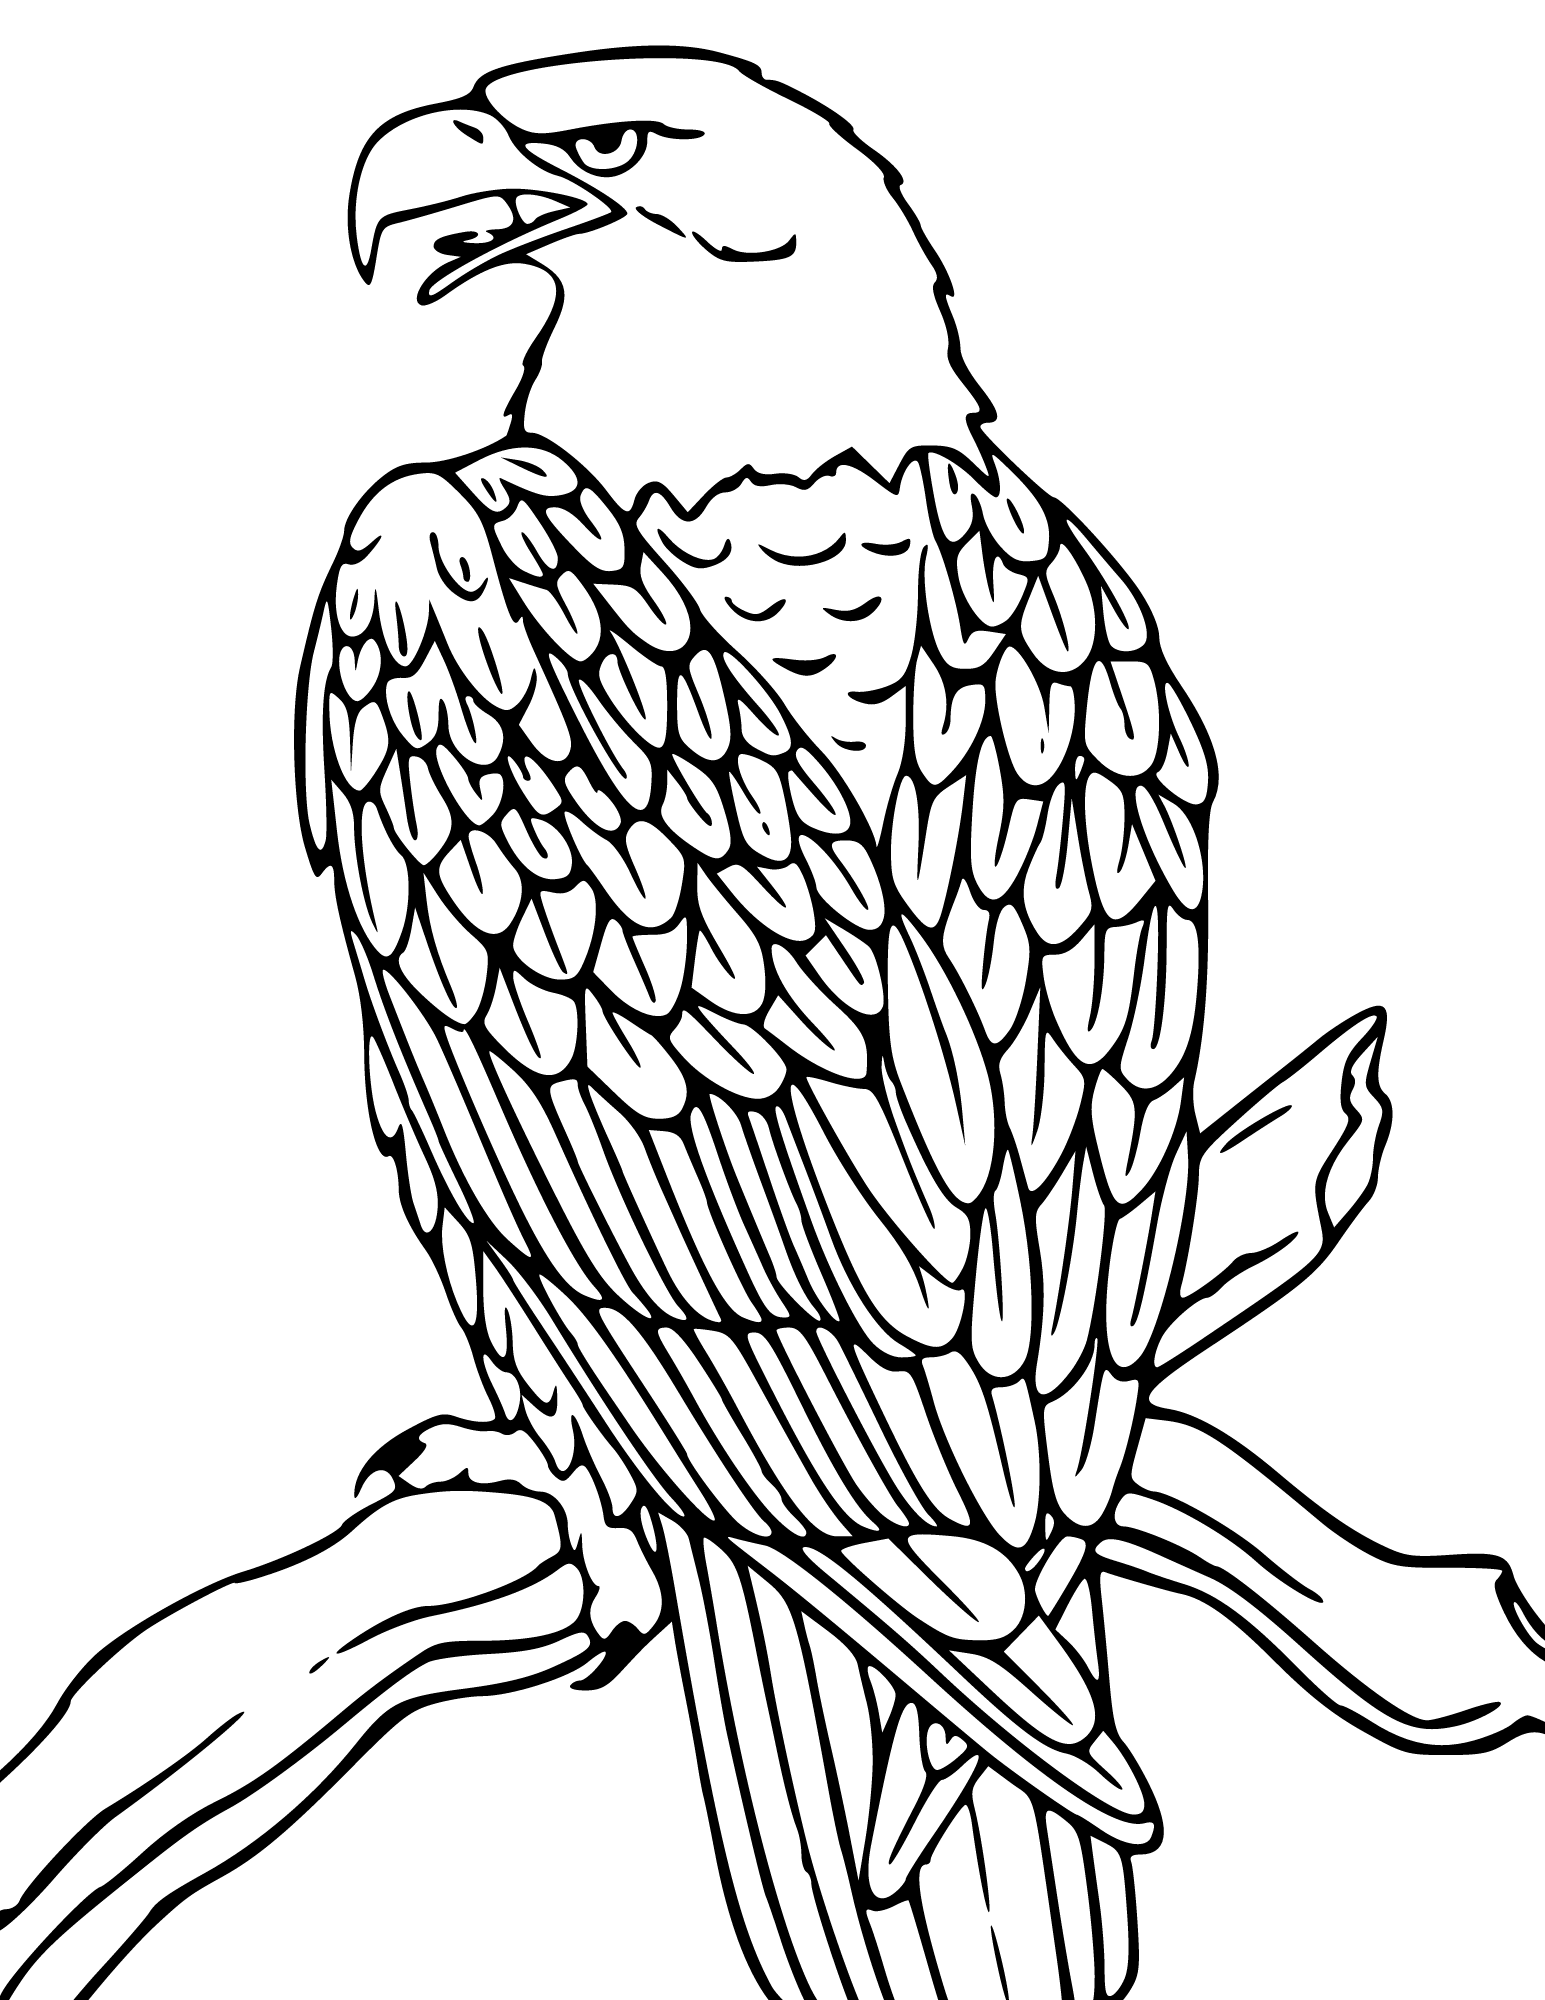 Free bald eagle coloring pages for kids and adults